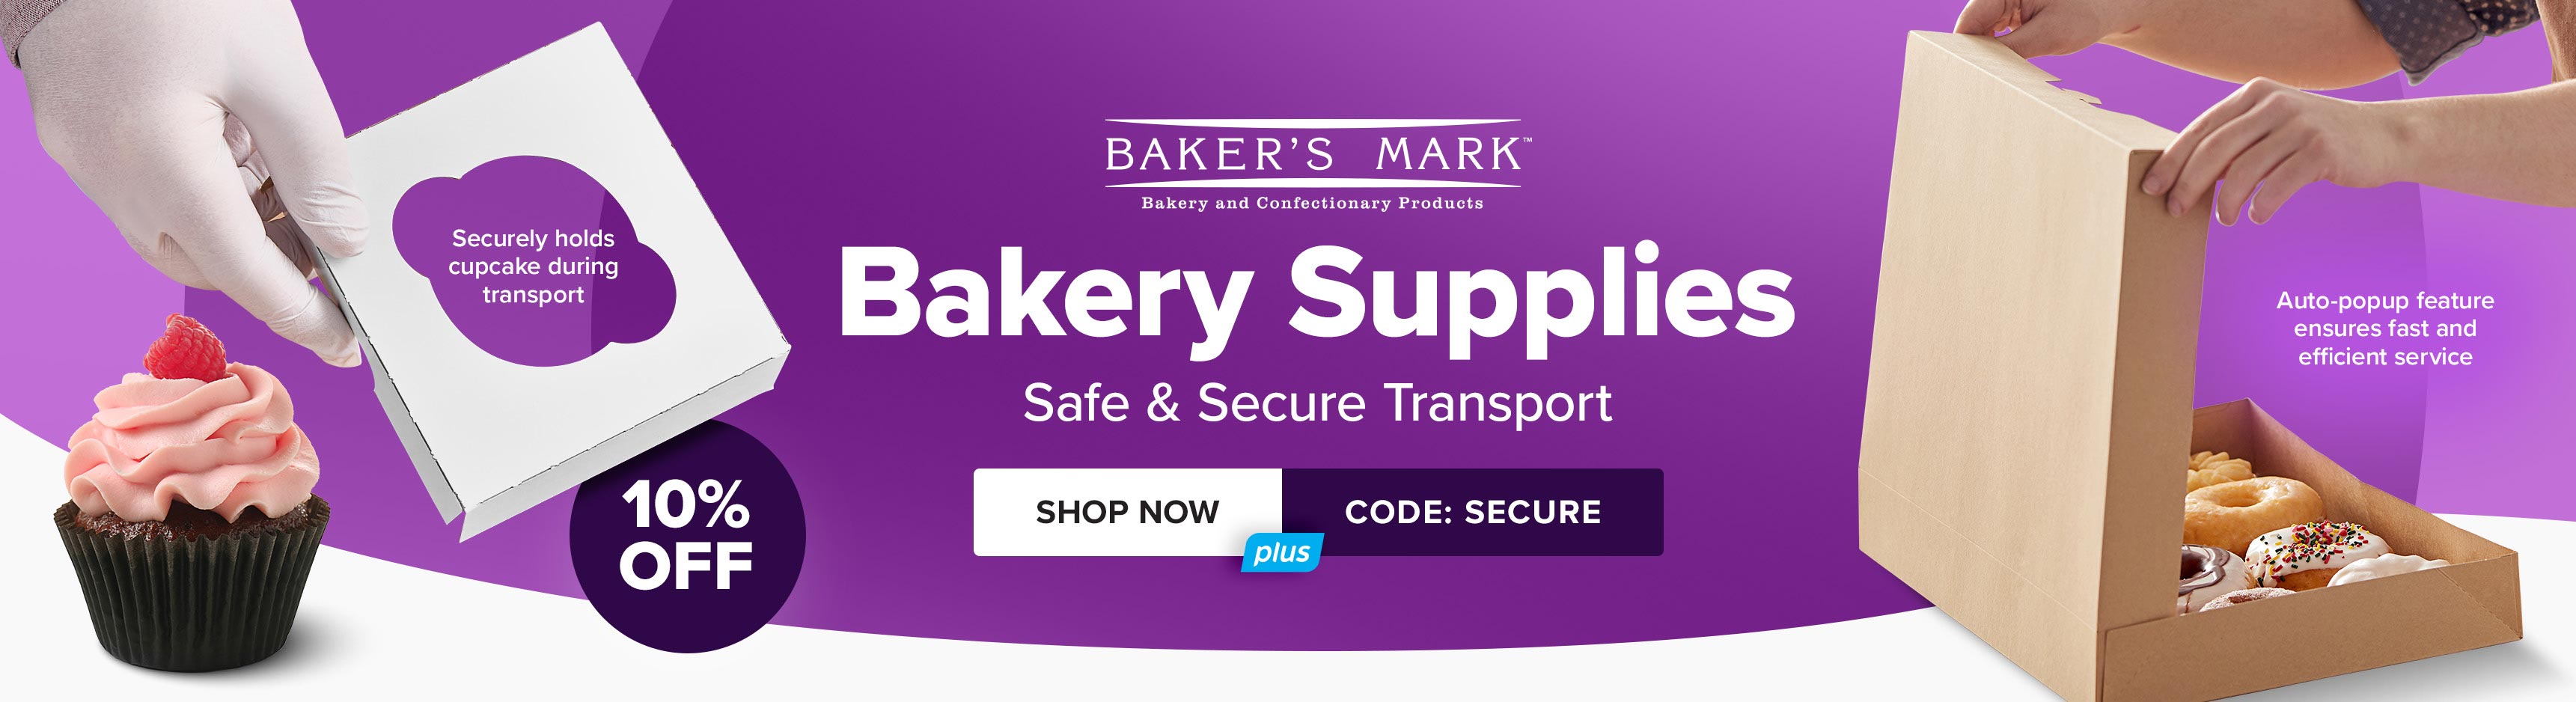 Baker's Mark Bakery Supplies are 10% Off this week